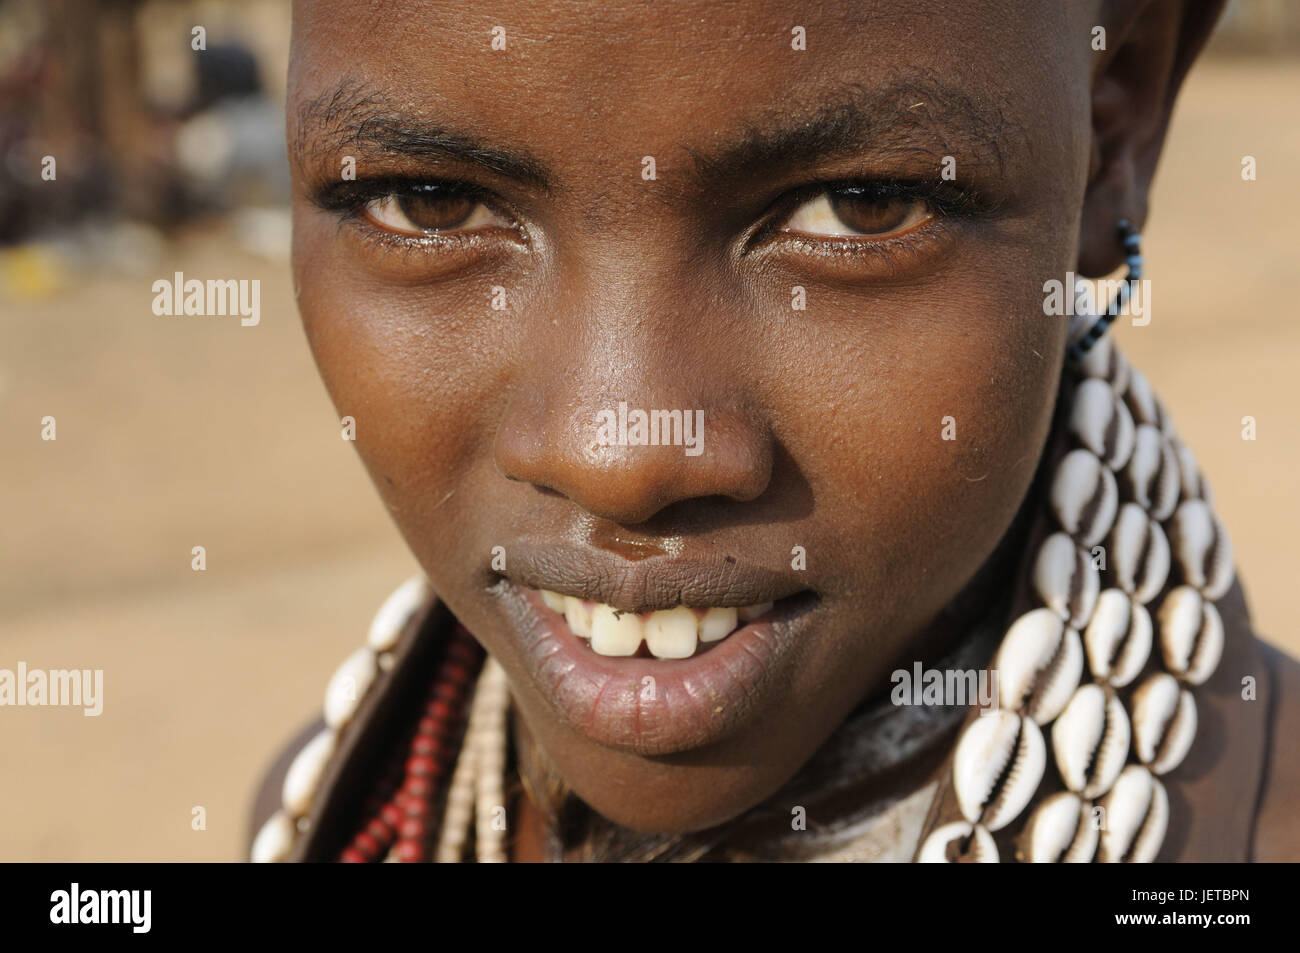 Girls, tribe Hamar, southern Omotal, south Ethiopia, Stock Photo